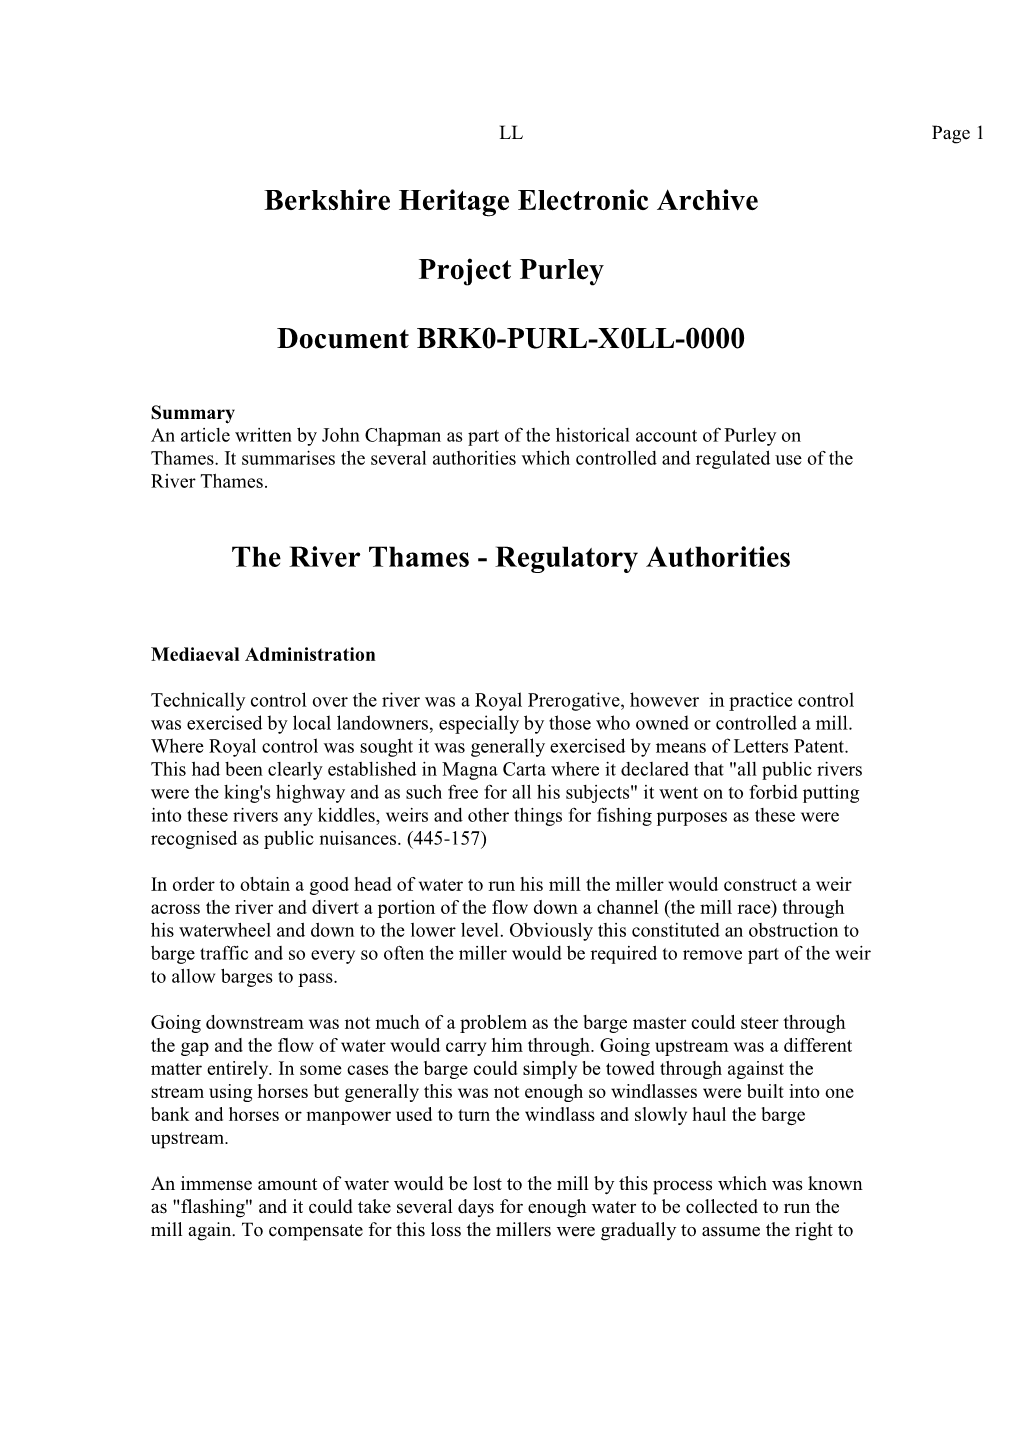 Berkshire Heritage Electronic Archive Project Purley Document BRK0-PURL-X0LL-0000 the River Thames